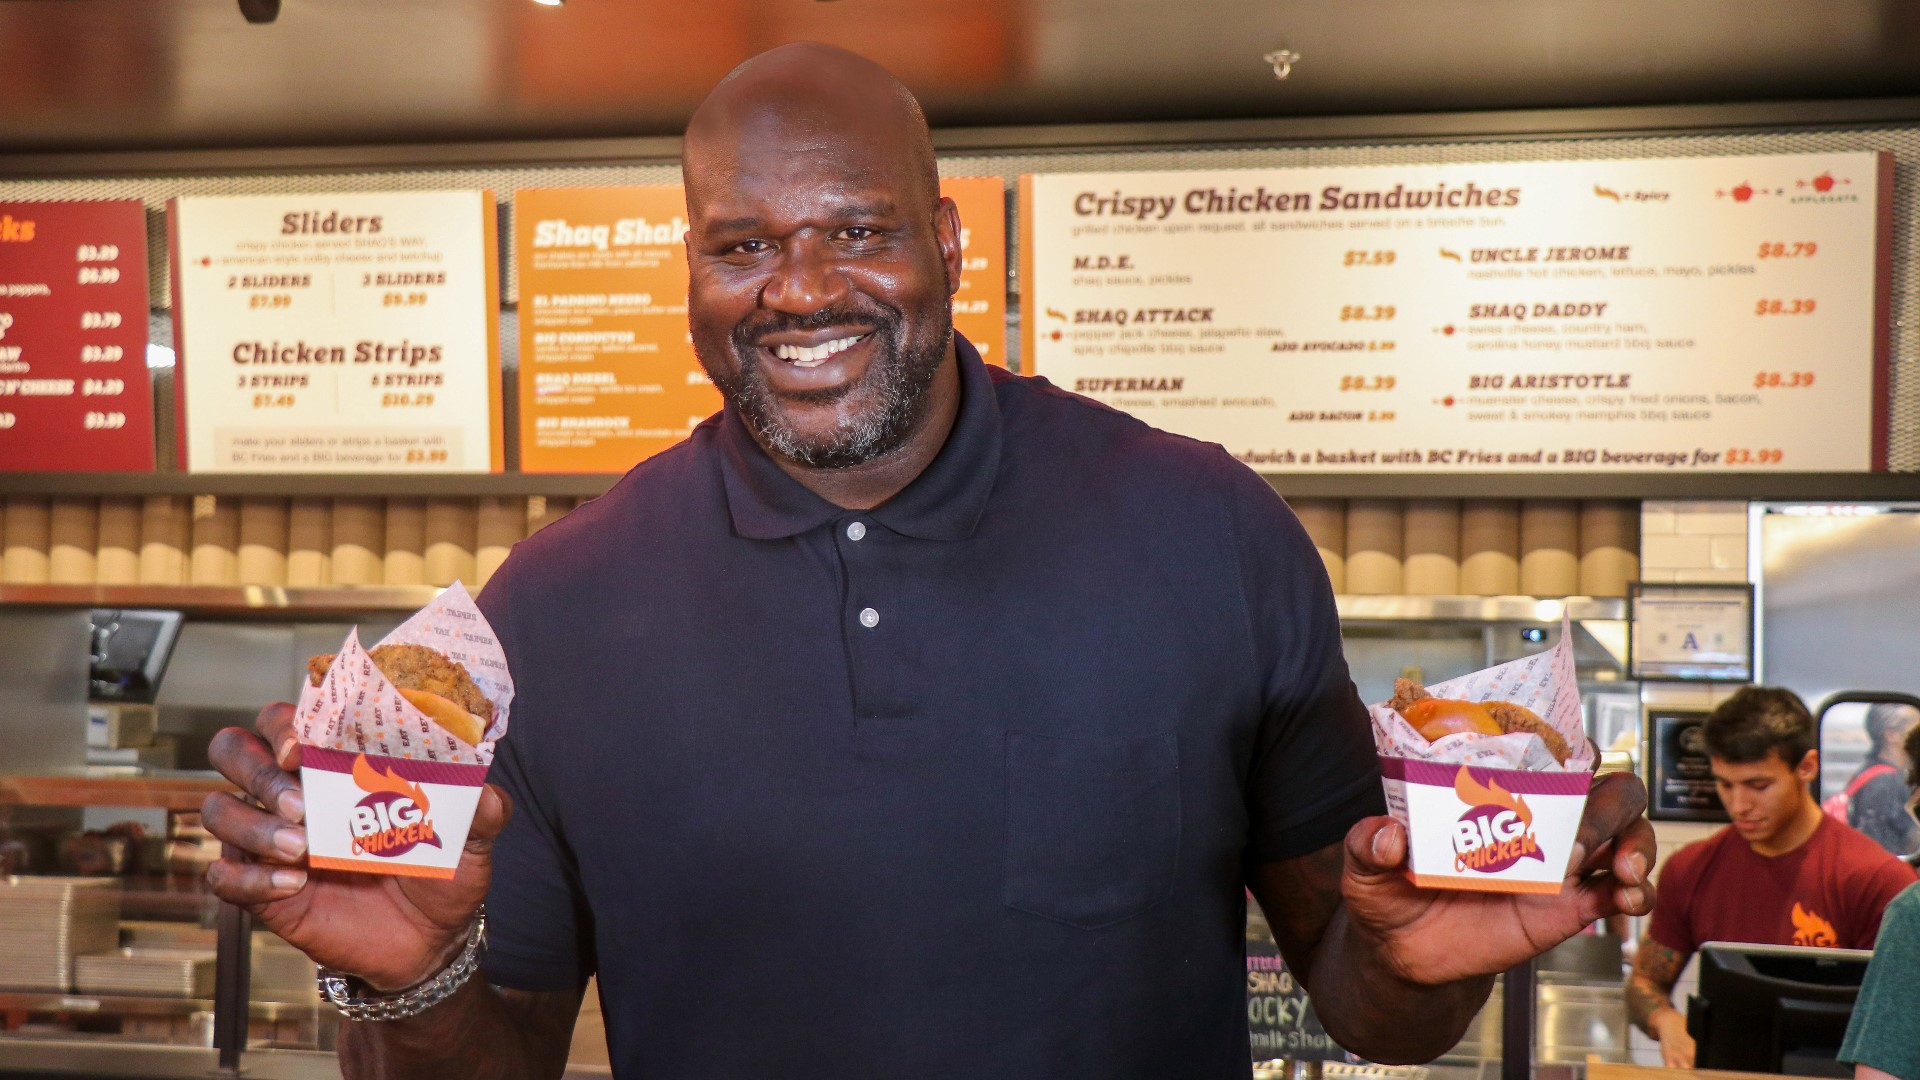 Big Chicken was founded in 2018 by NBA Hall of Famer Shaquille O'Neal.